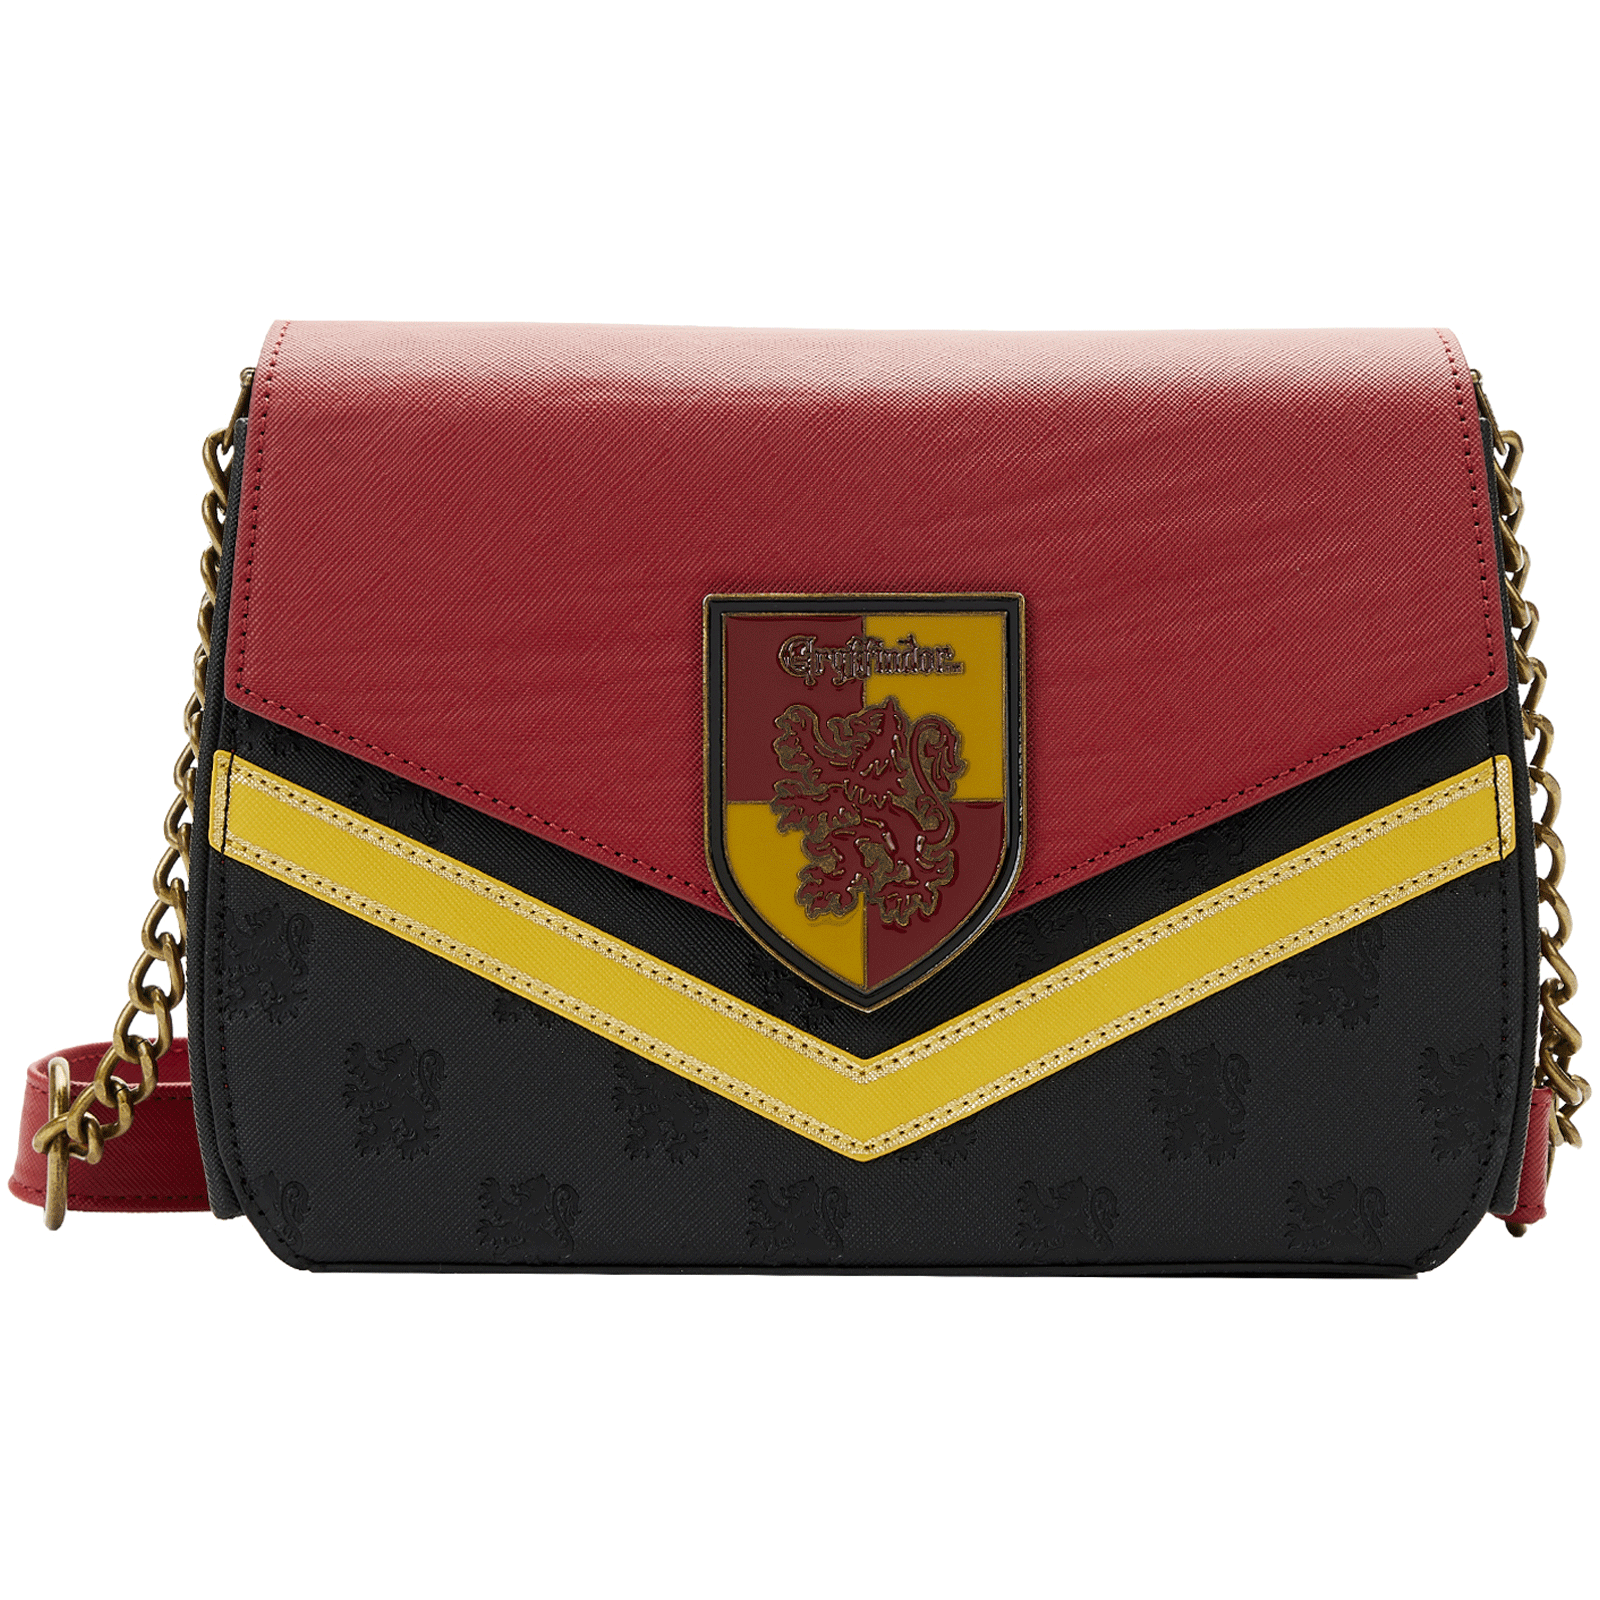 Loungefly x Harry Potter Gryffindor Chain Strap Crossbody Bag